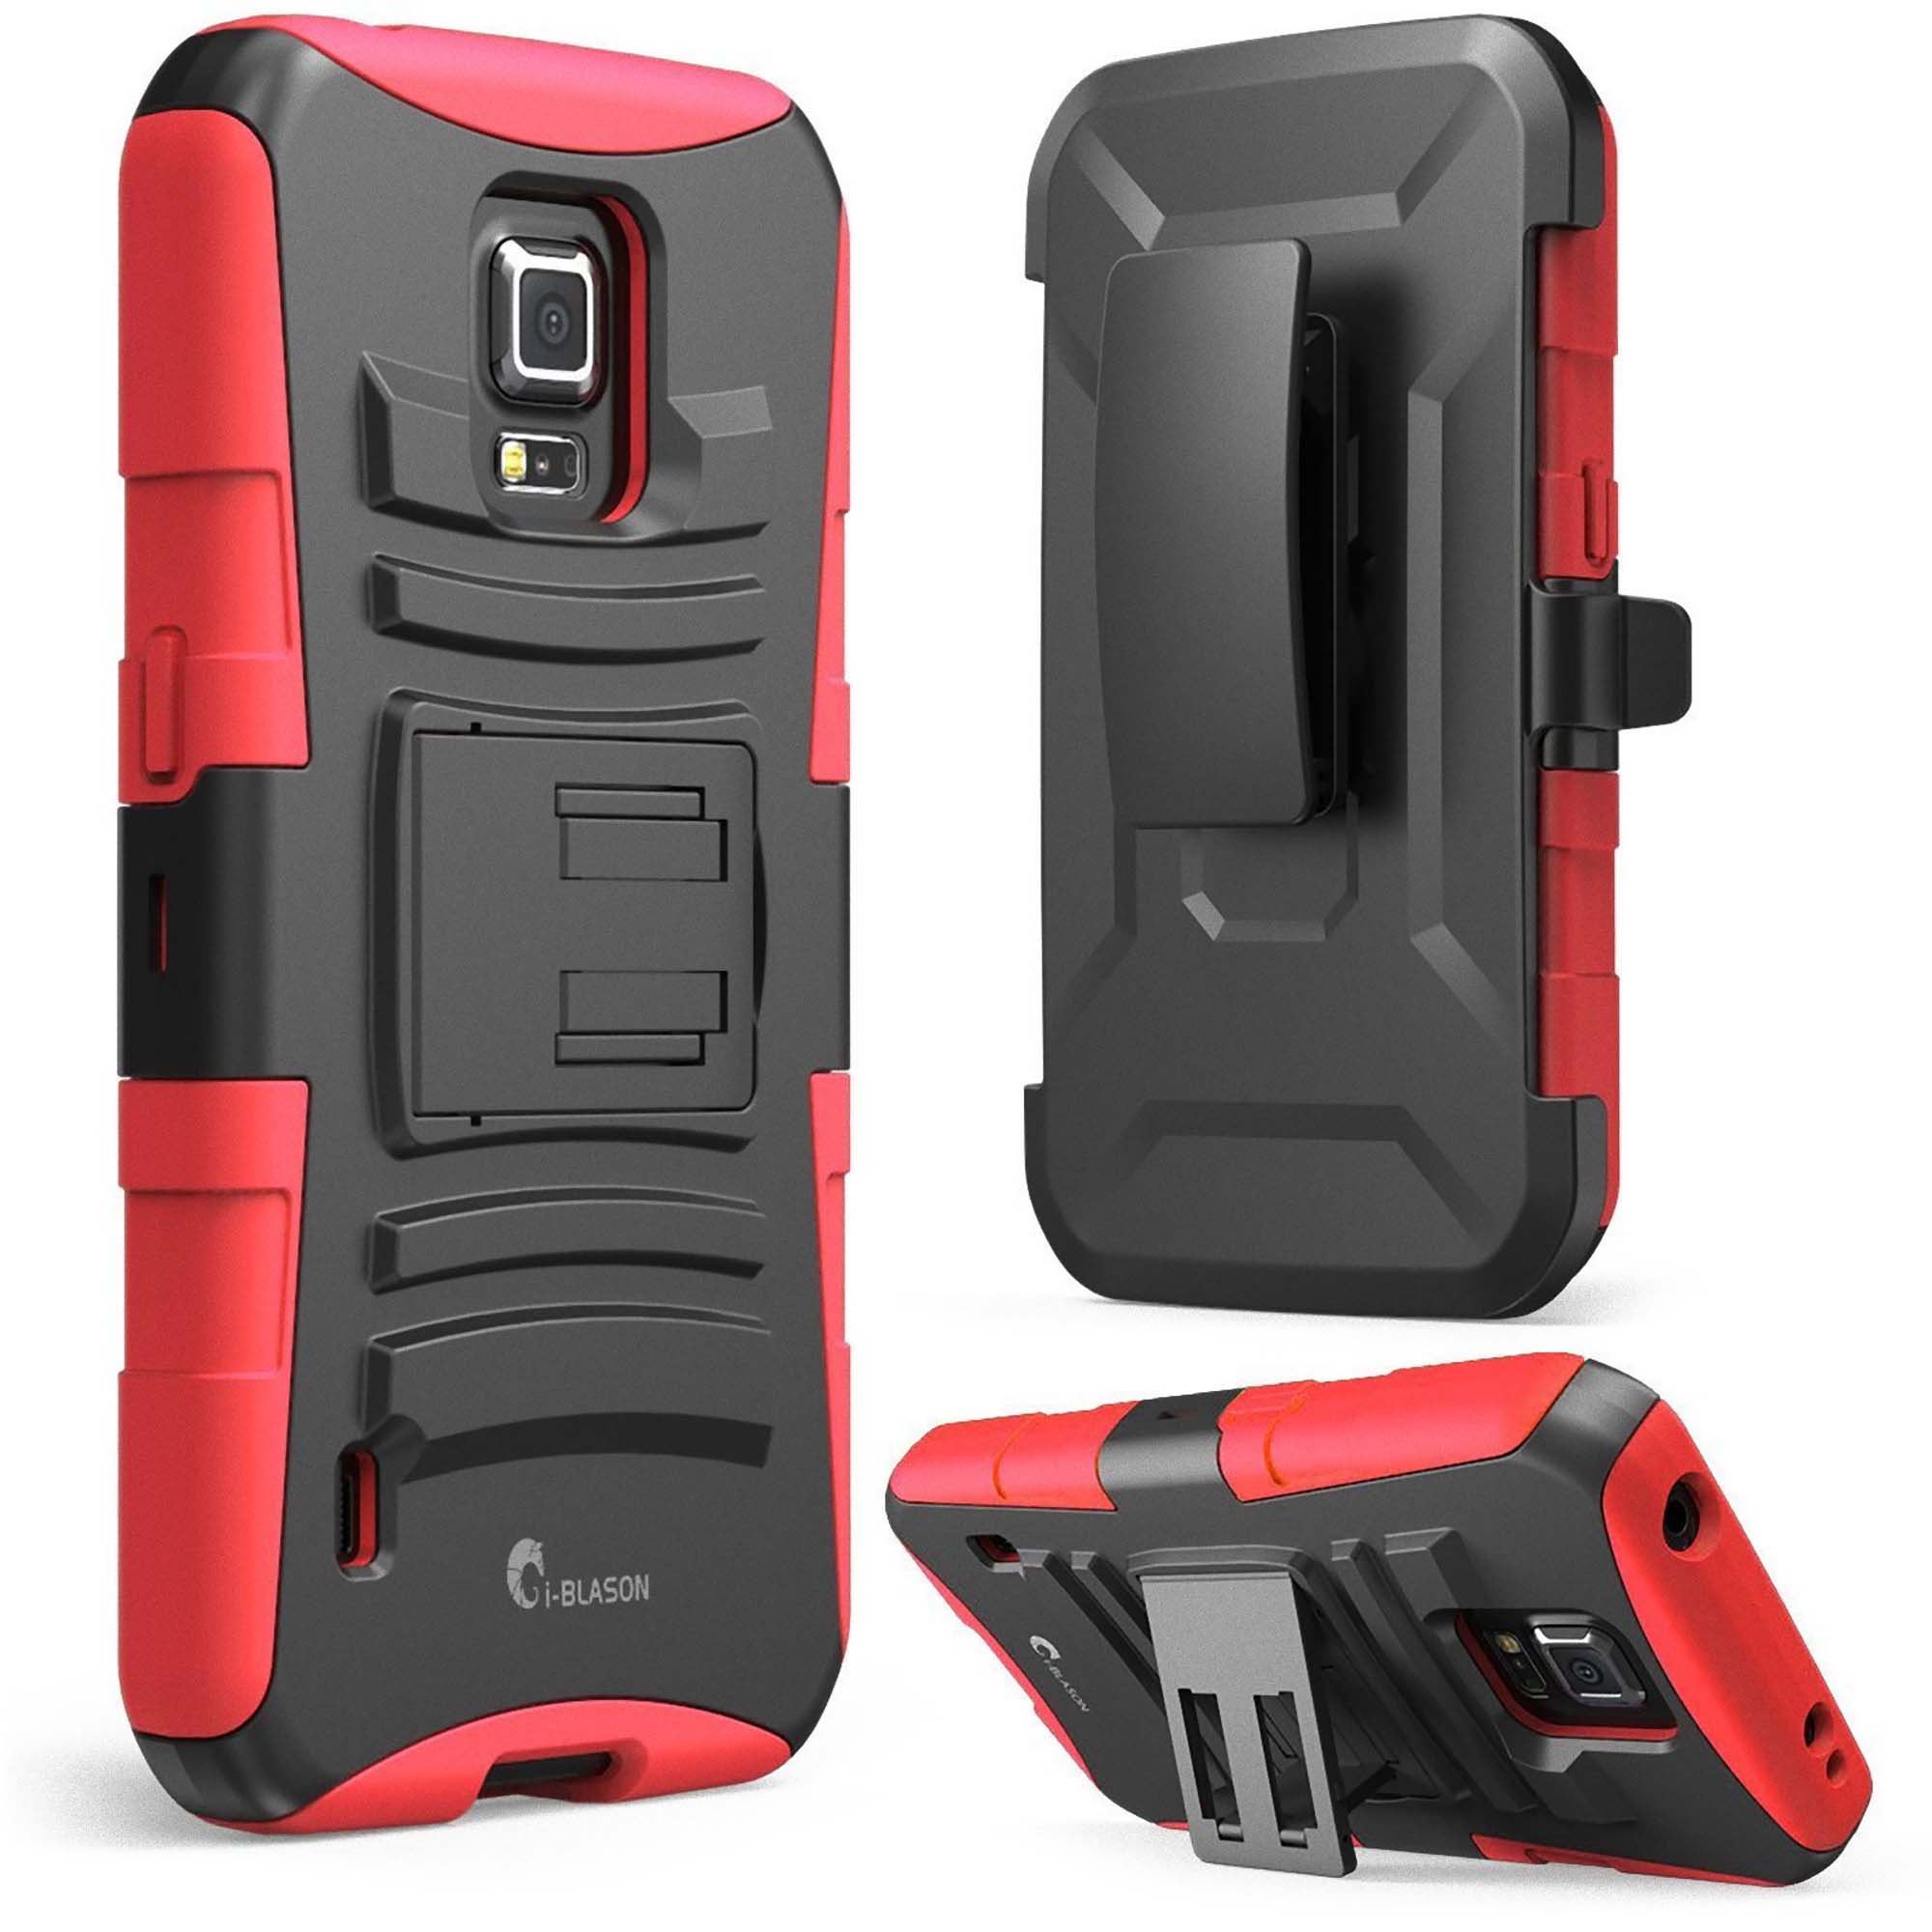 i-BLASON S5Active-Prime-Red Galaxy S5 Dual Layer Holster Case with Kickstand and Locking Belt Swivel Clip for Samsung Galaxy S5